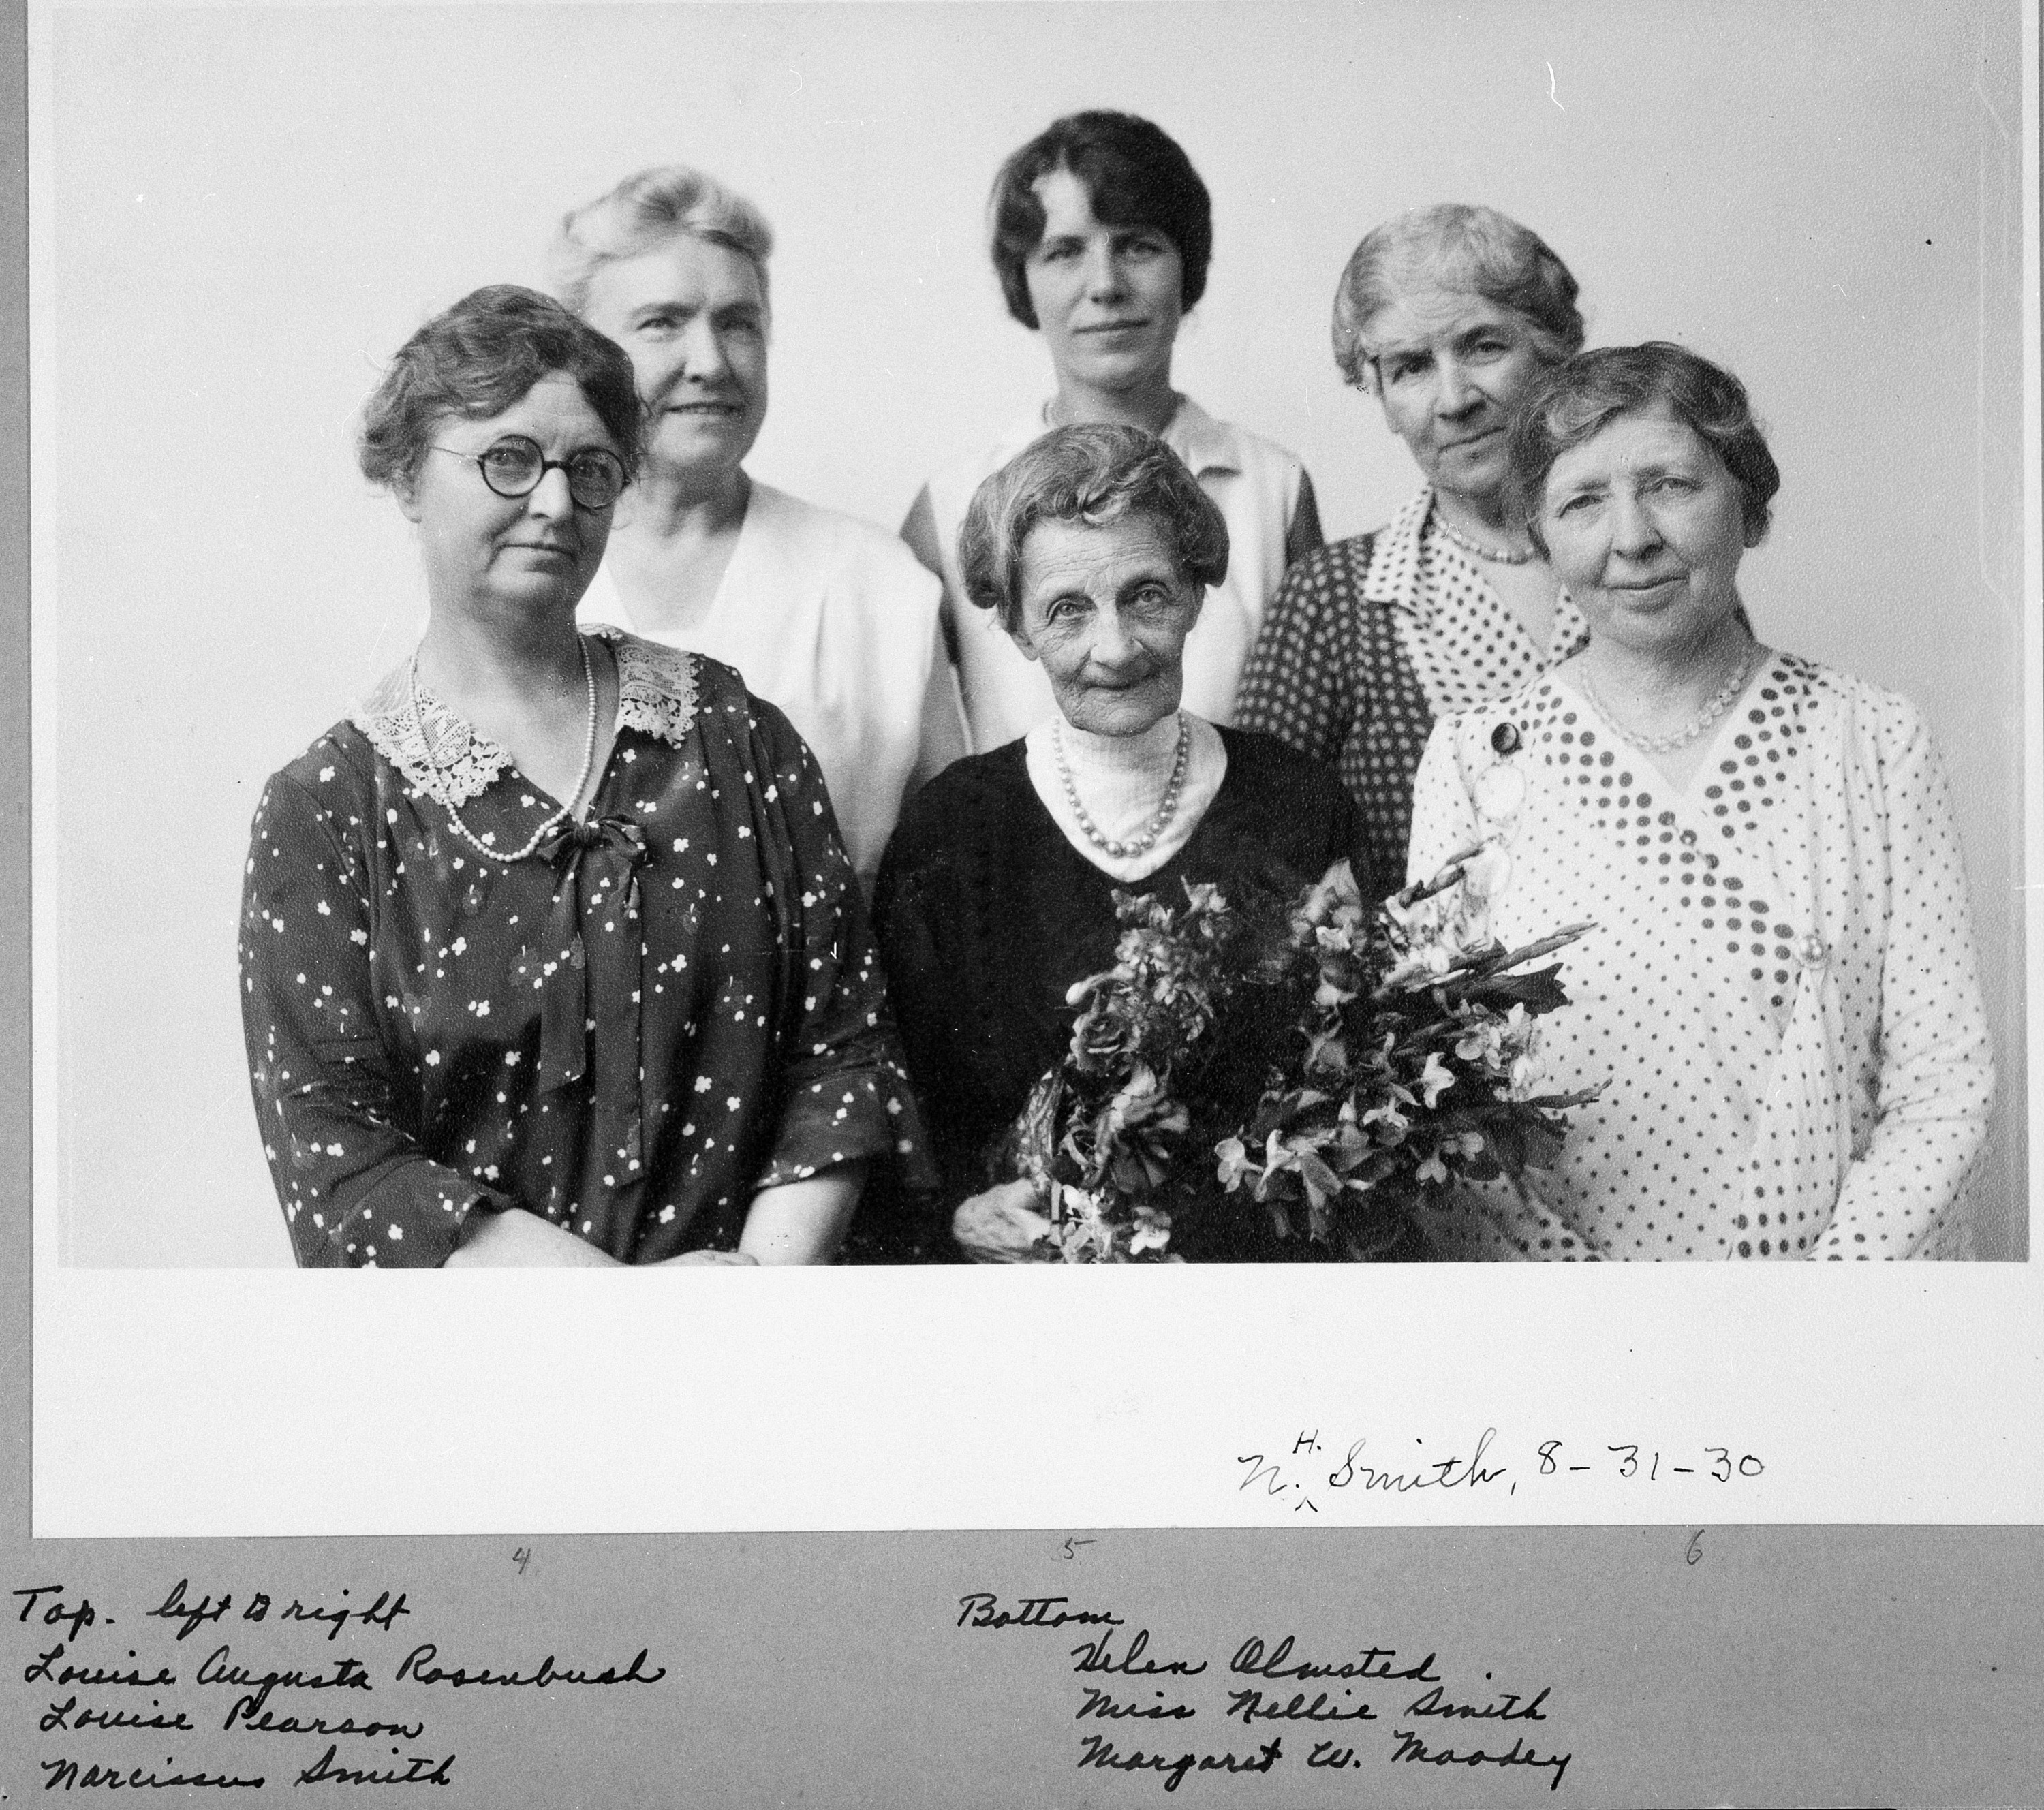 Six women pose for a photograph. The photo is dated 8-31-30. The names of the women are written in cursive below the photo.The include: Louise A. Rosenbusch, Louise Pearson, Narcissus Smith, Helen A. Olmsted, Nellie Smith, and Margaret W. Moodey. 